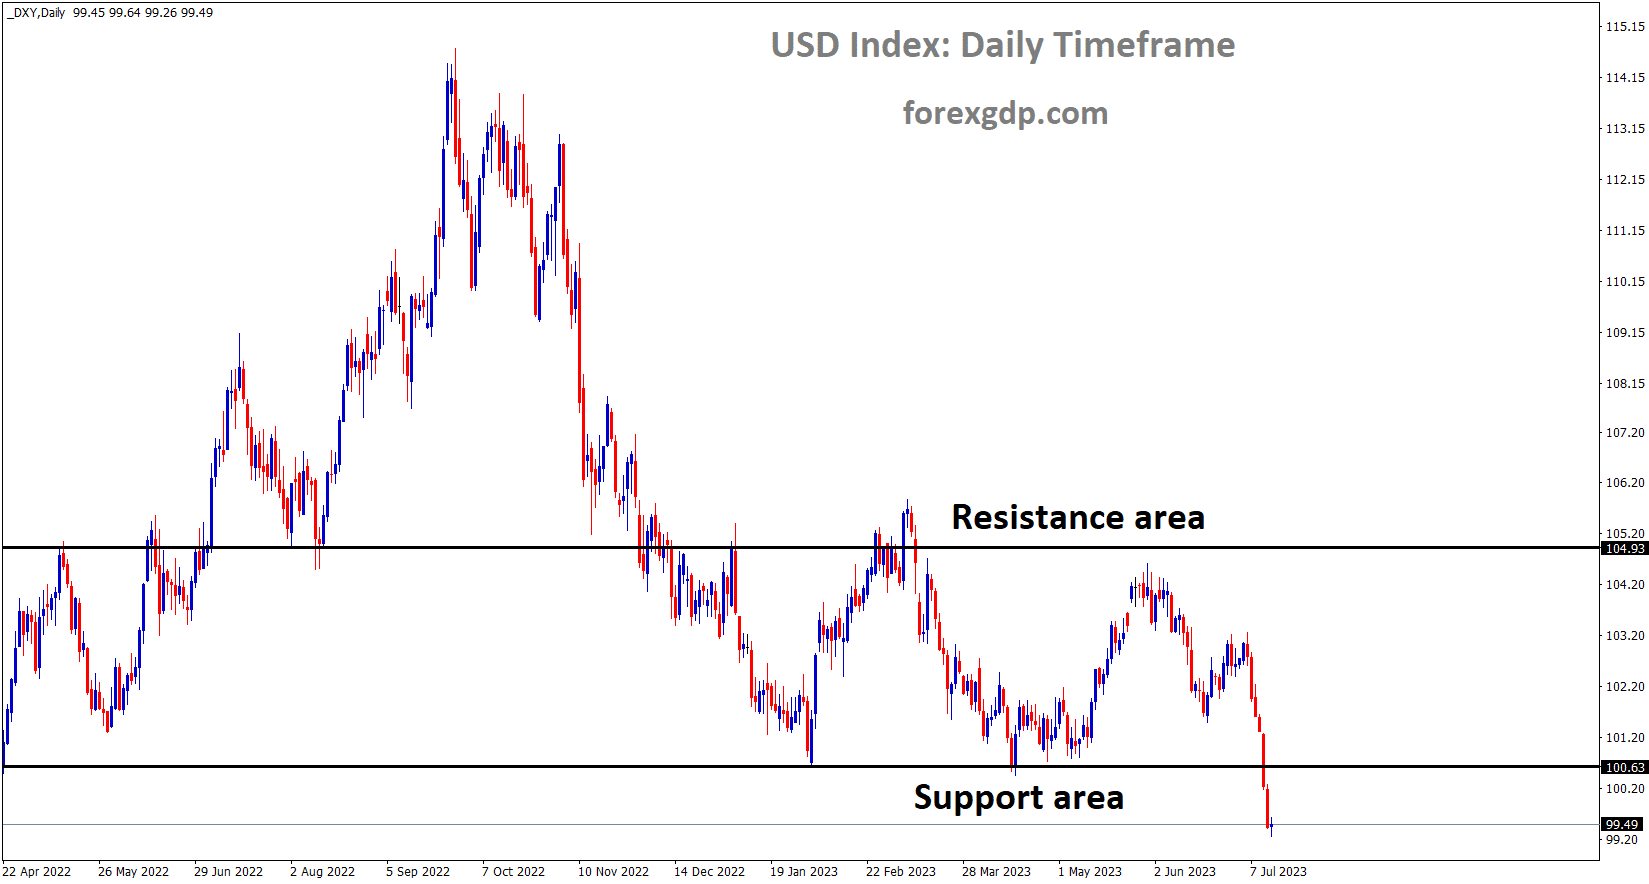 DXY US Dollar index has broken the Box pattern in downside